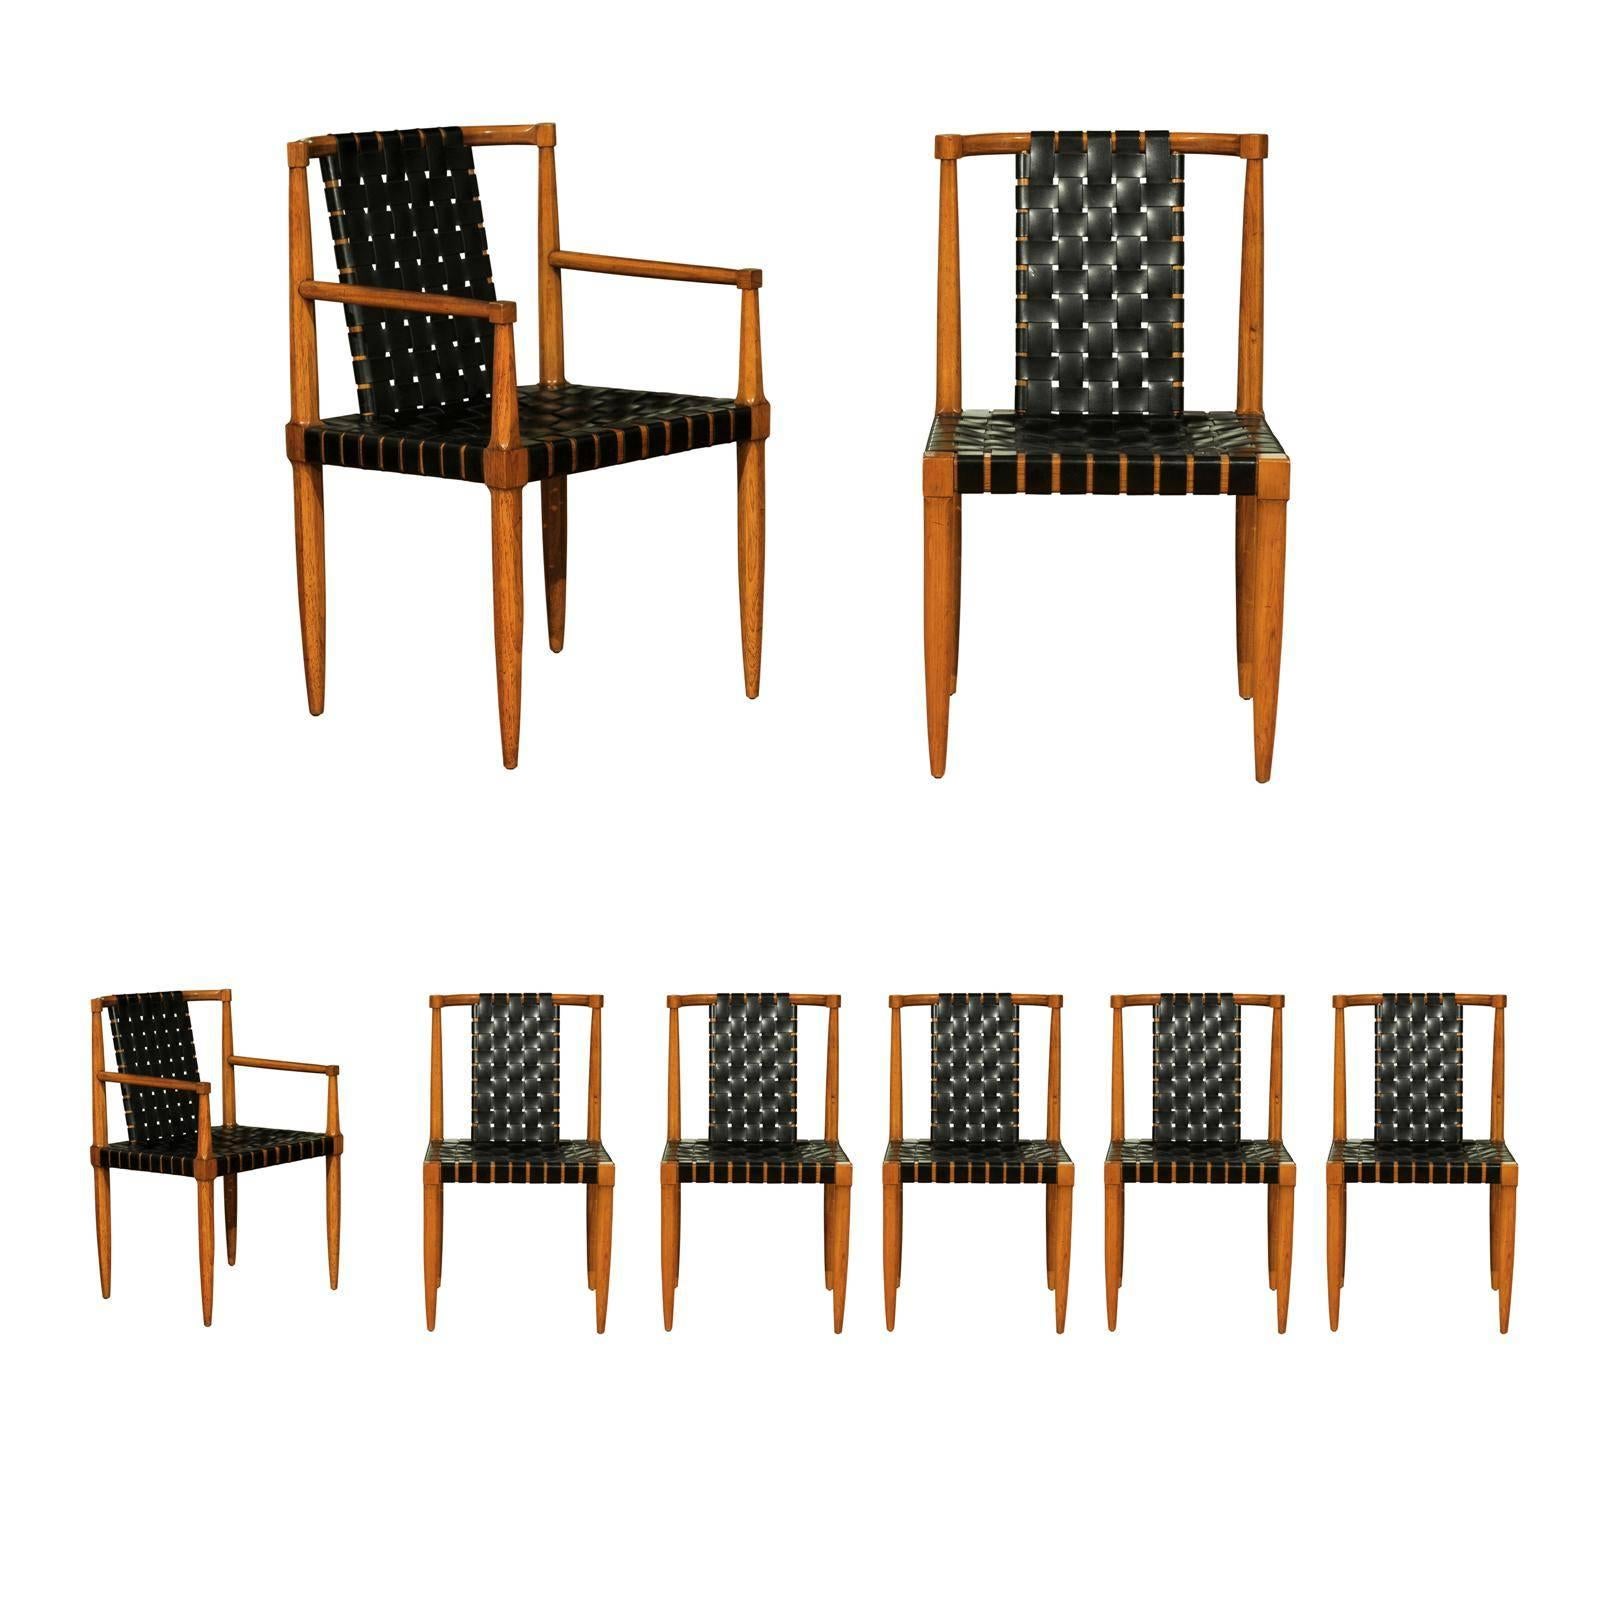 Miraculous Rare Set of 8 Leather Strap Dining Chairs by Tomlinson, dated 1958 For Sale